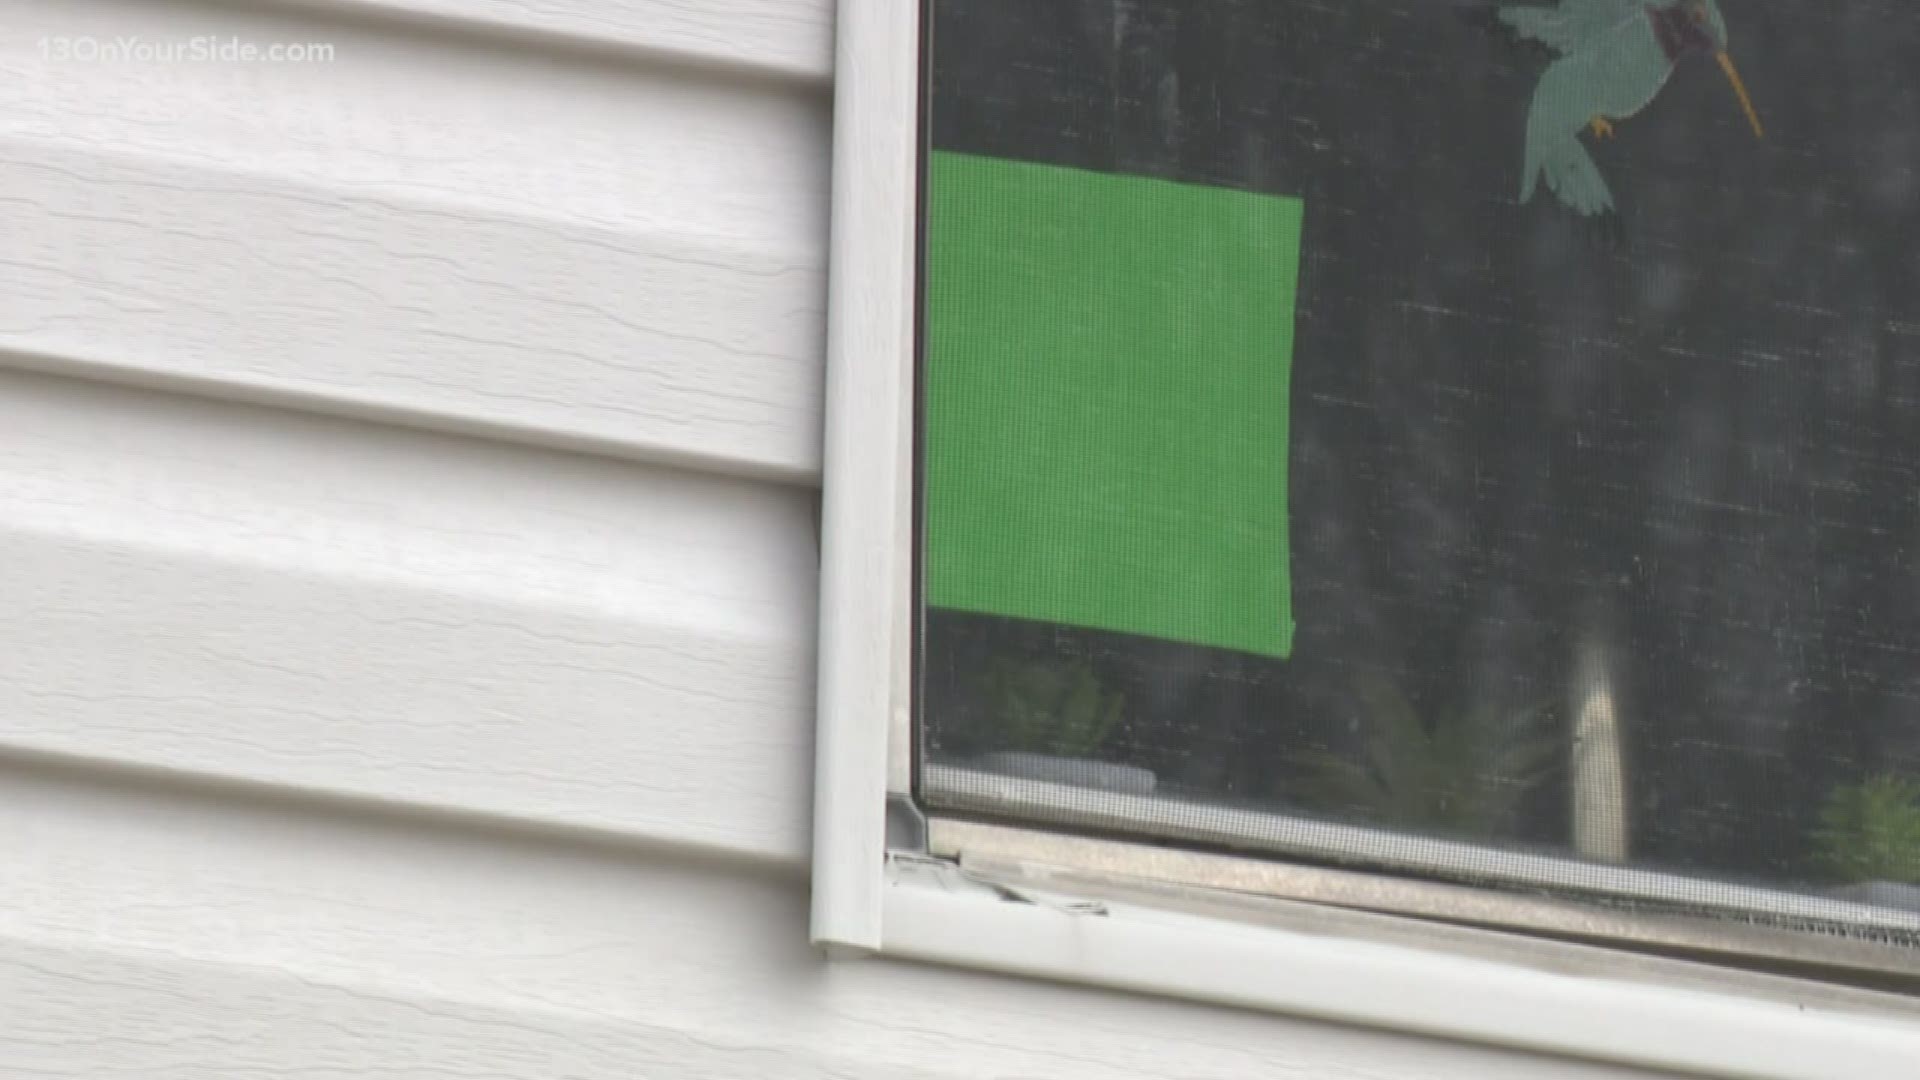 Green in the window means things are good, red to signal a need for help, anything from groceries to information.